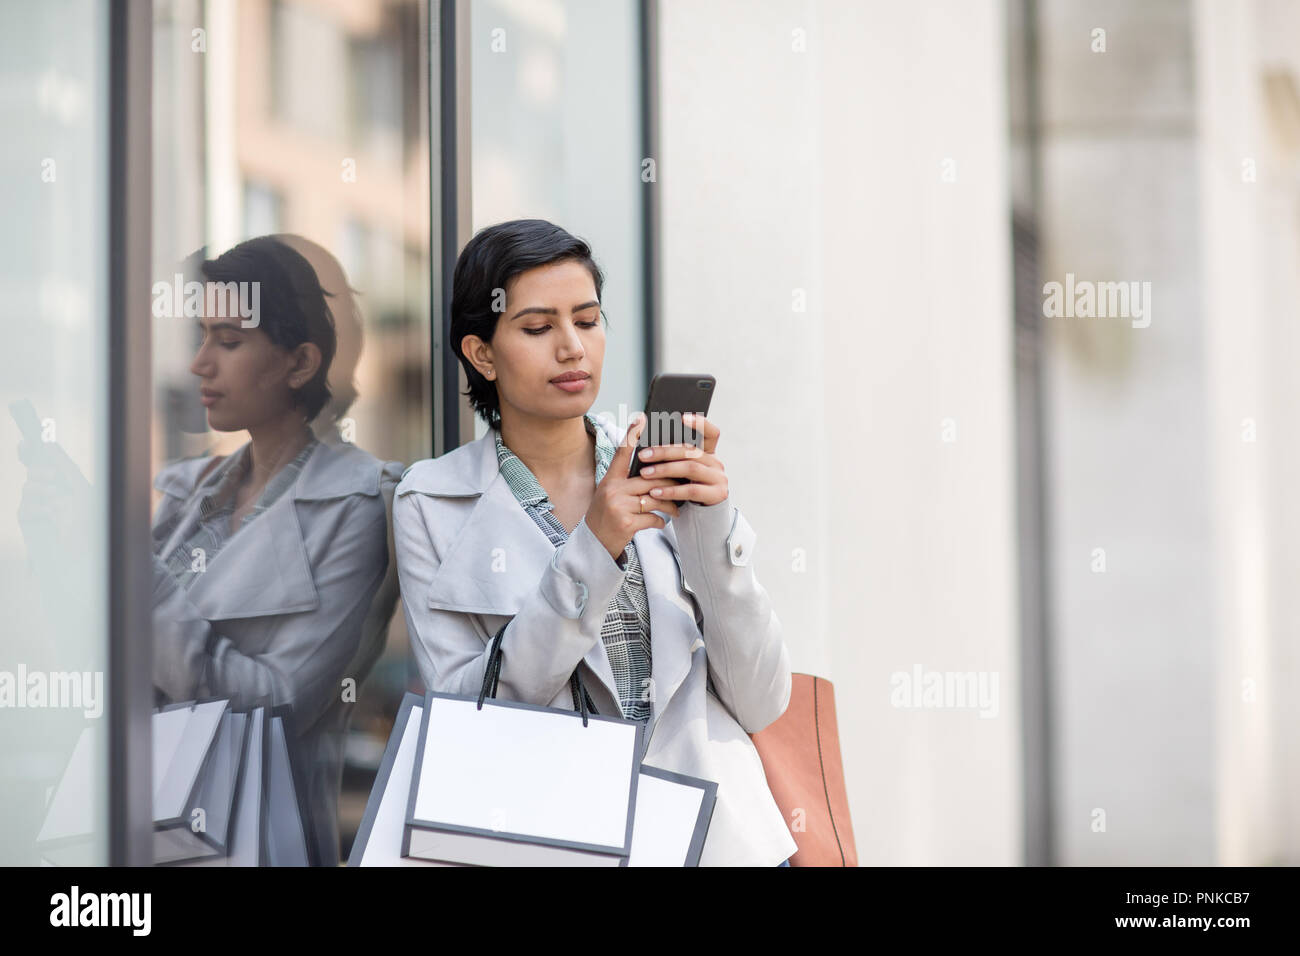 Arabic woman using a smartphone on a shopping trip Stock Photo